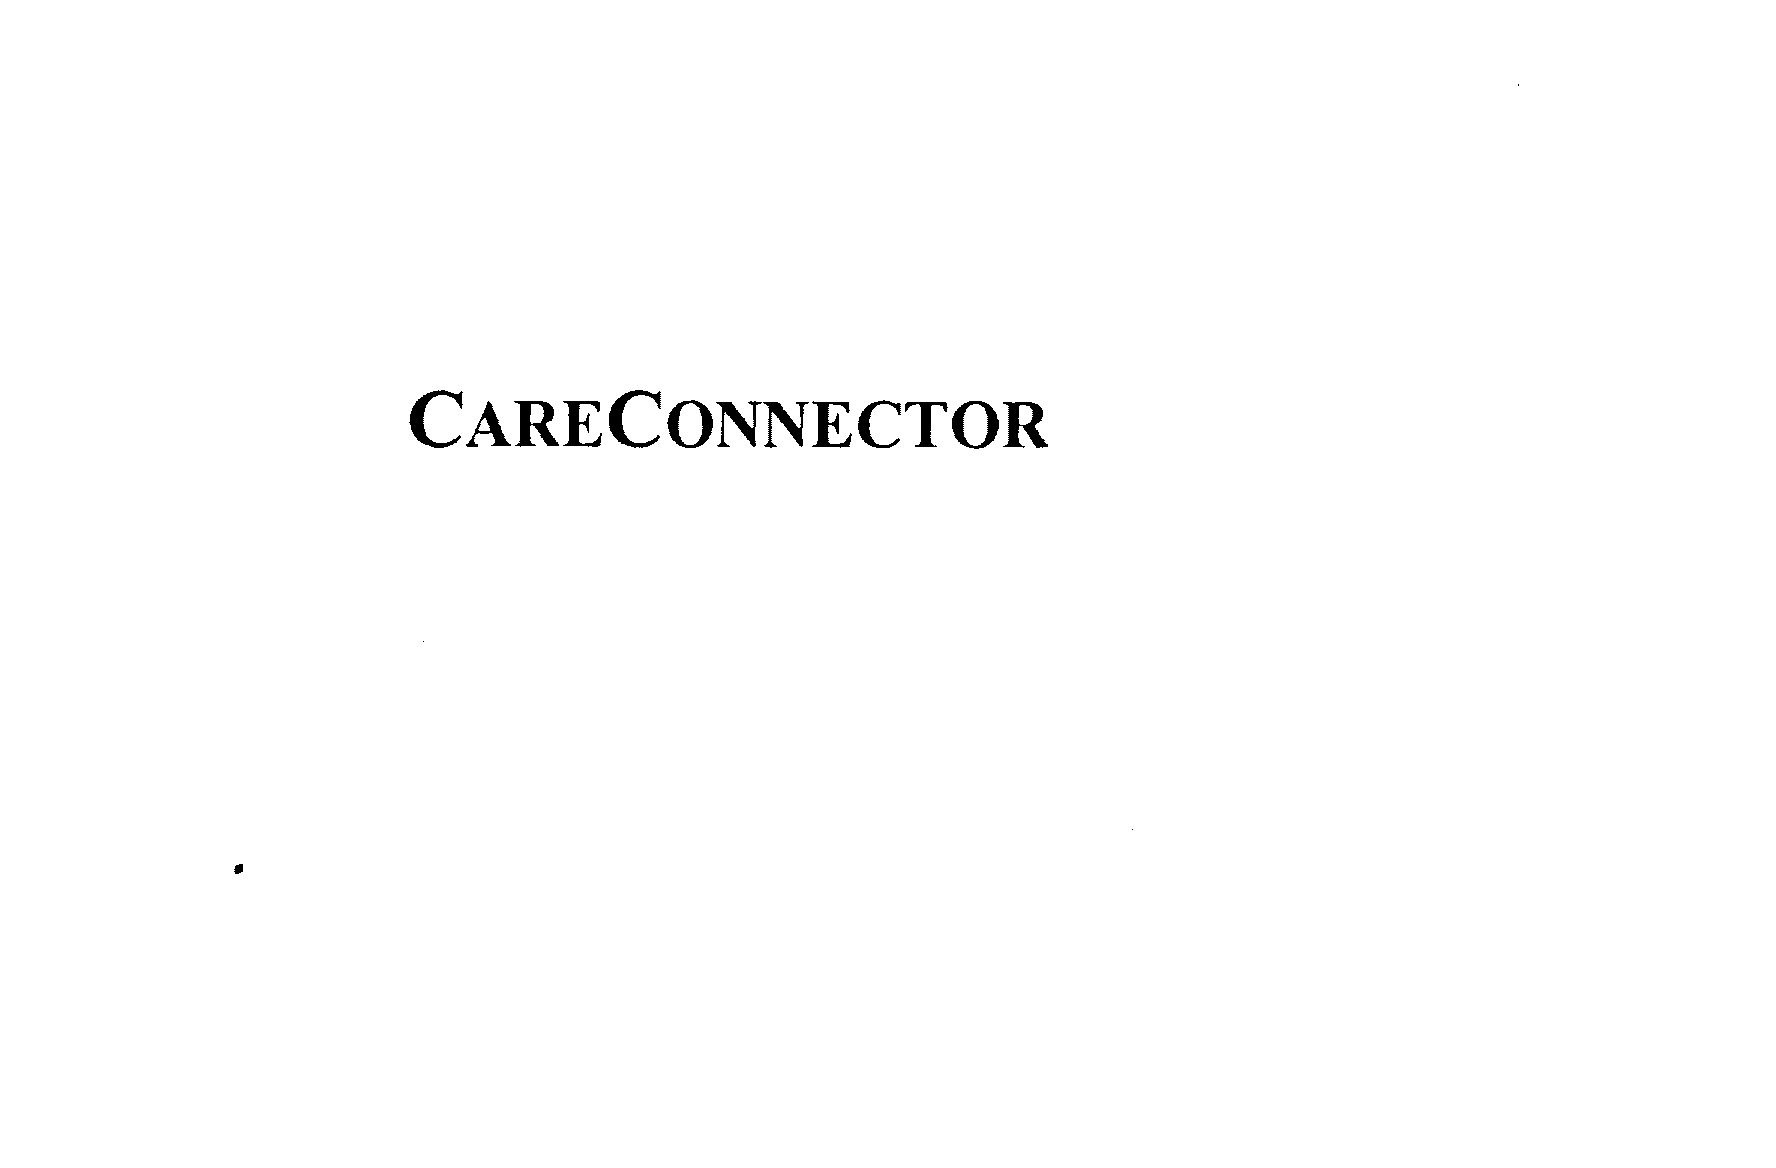  CARECONNECTOR